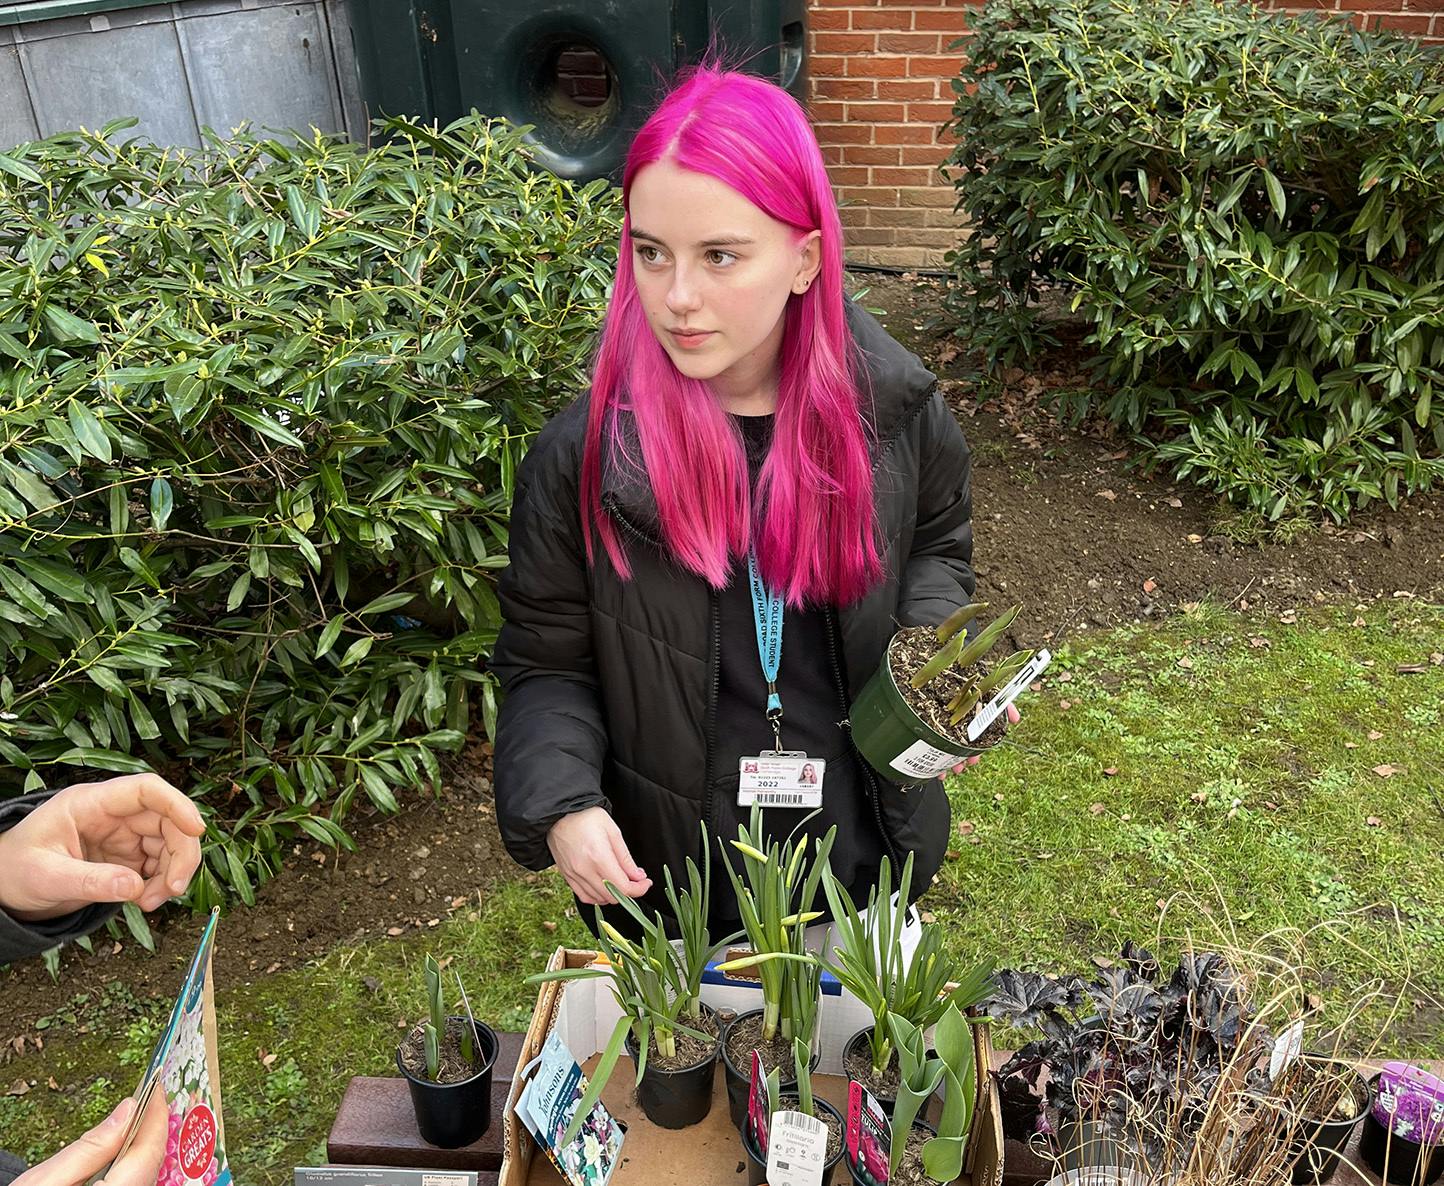 Student taking part in the gardening enrichment activity